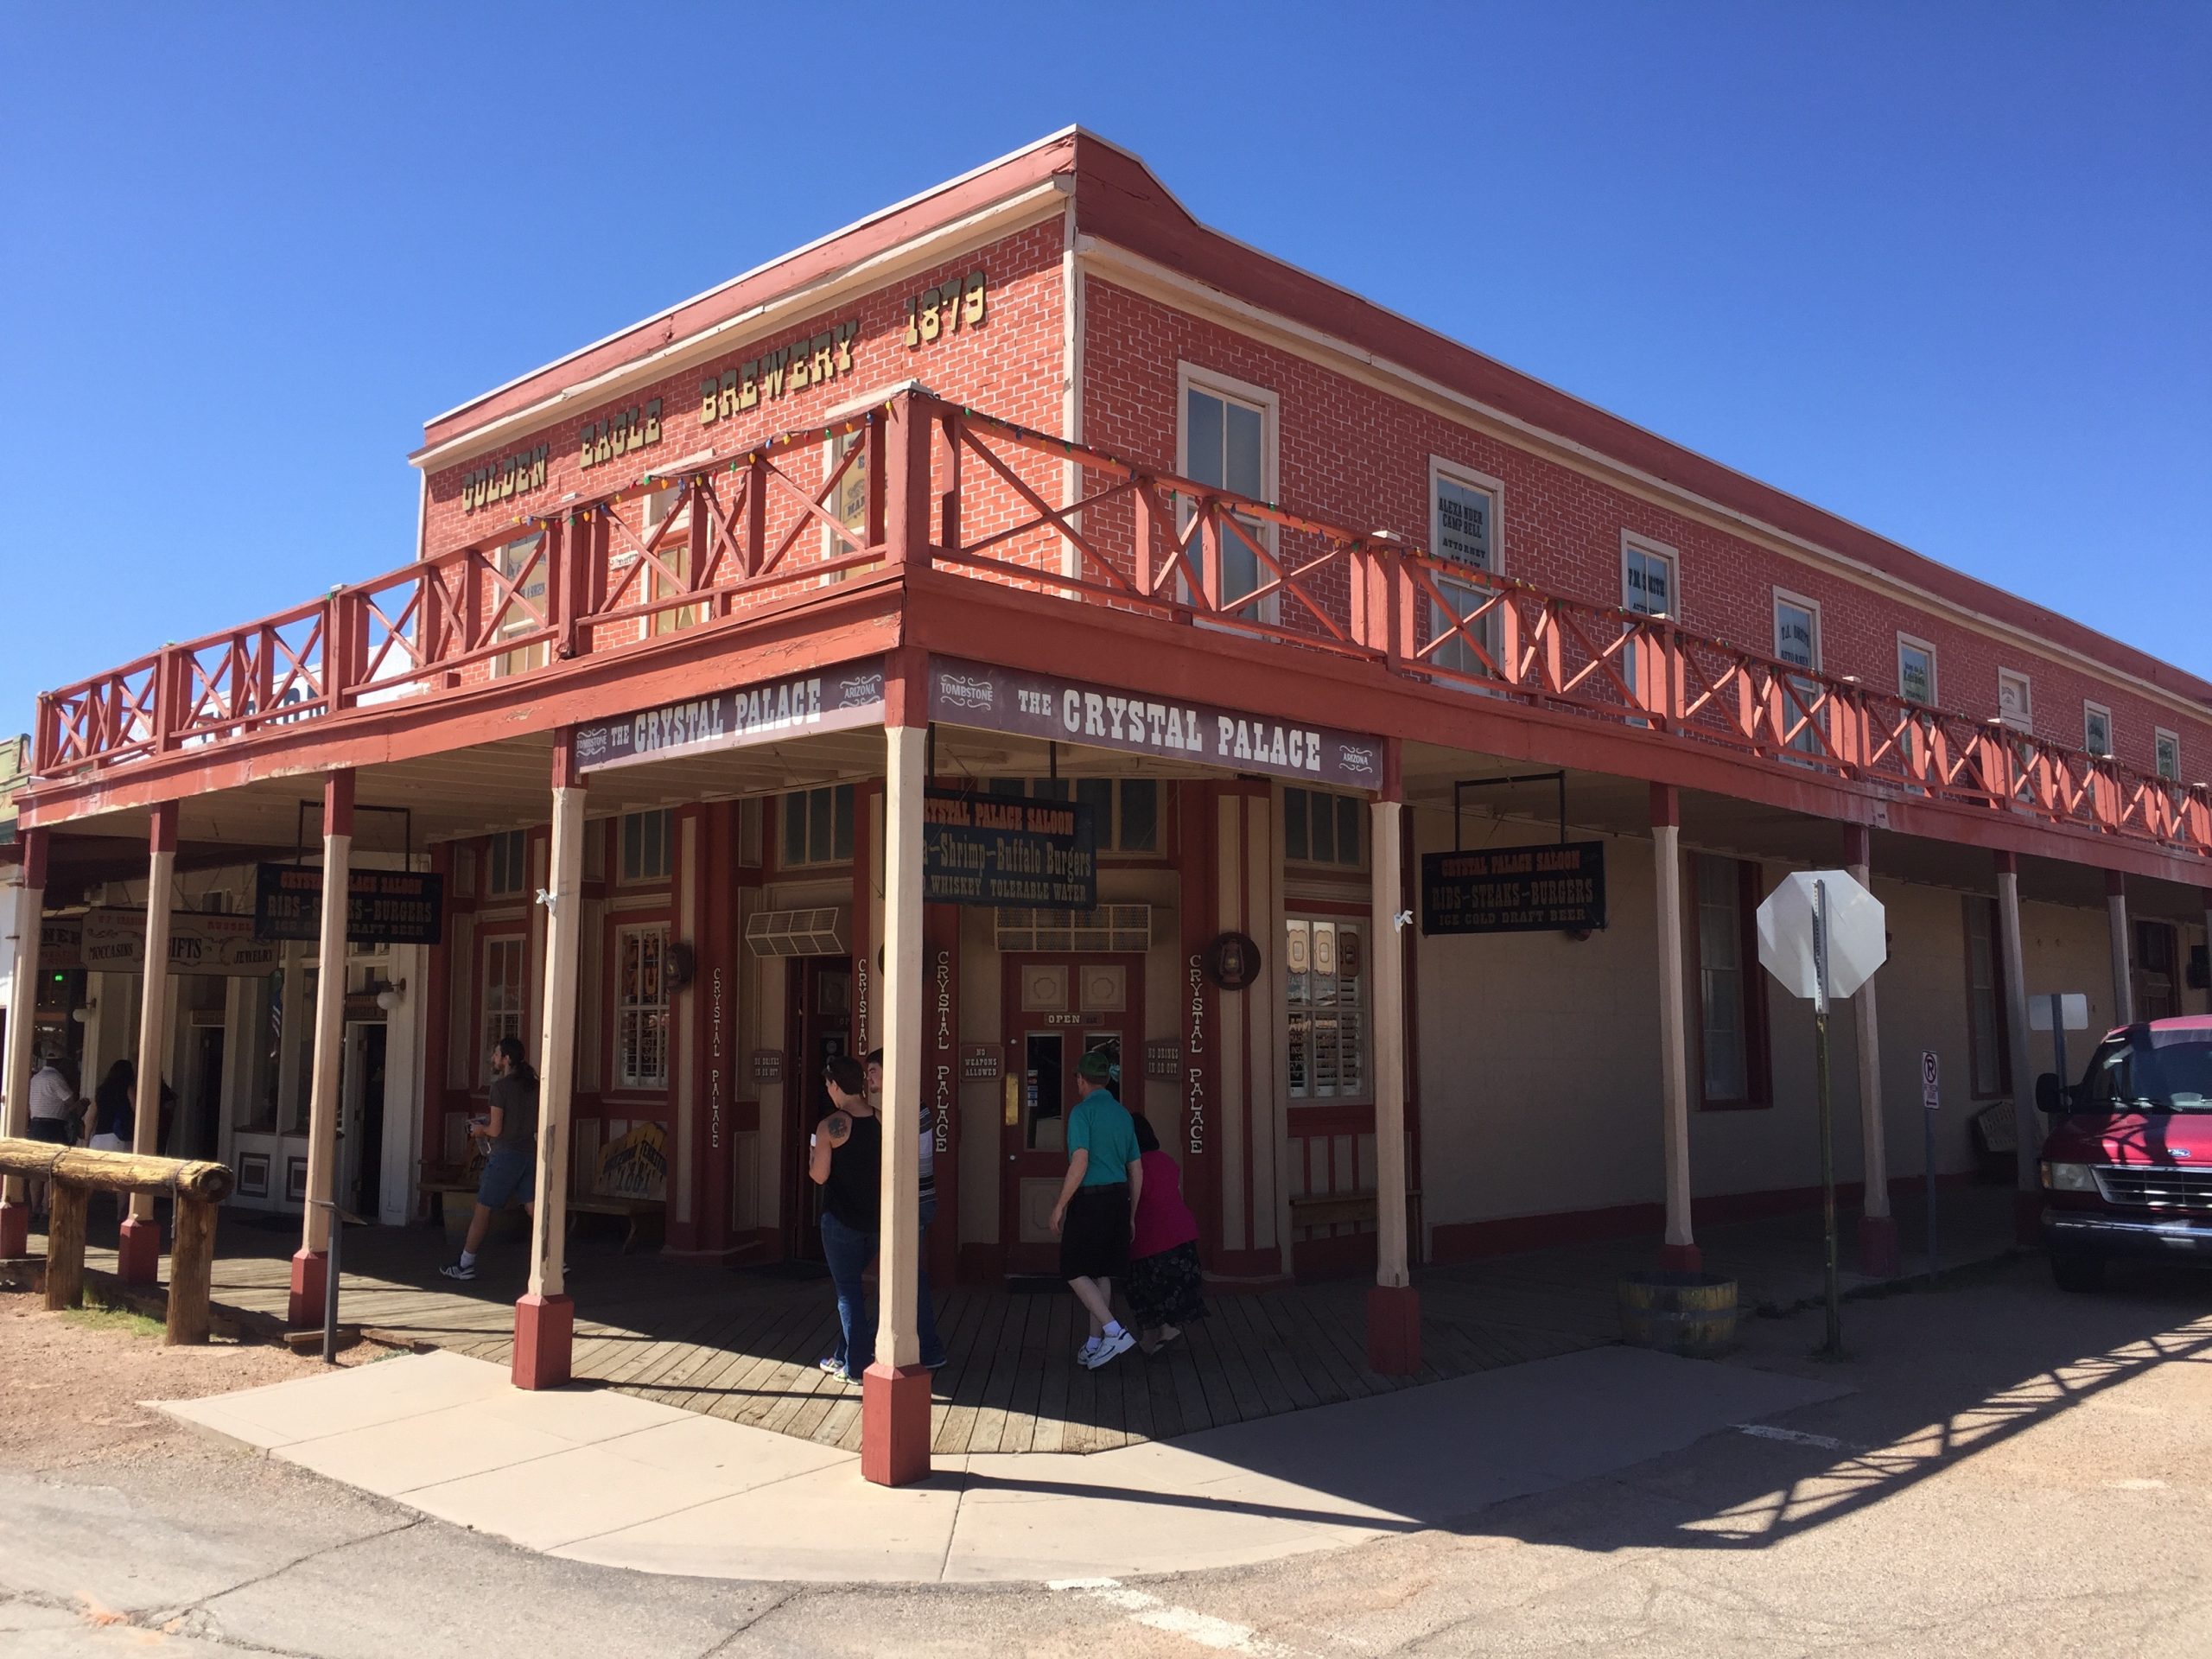 Outdoor Photo of Crystal Palace Saloon, site of the bucket of blood, in Tombstone, AZ